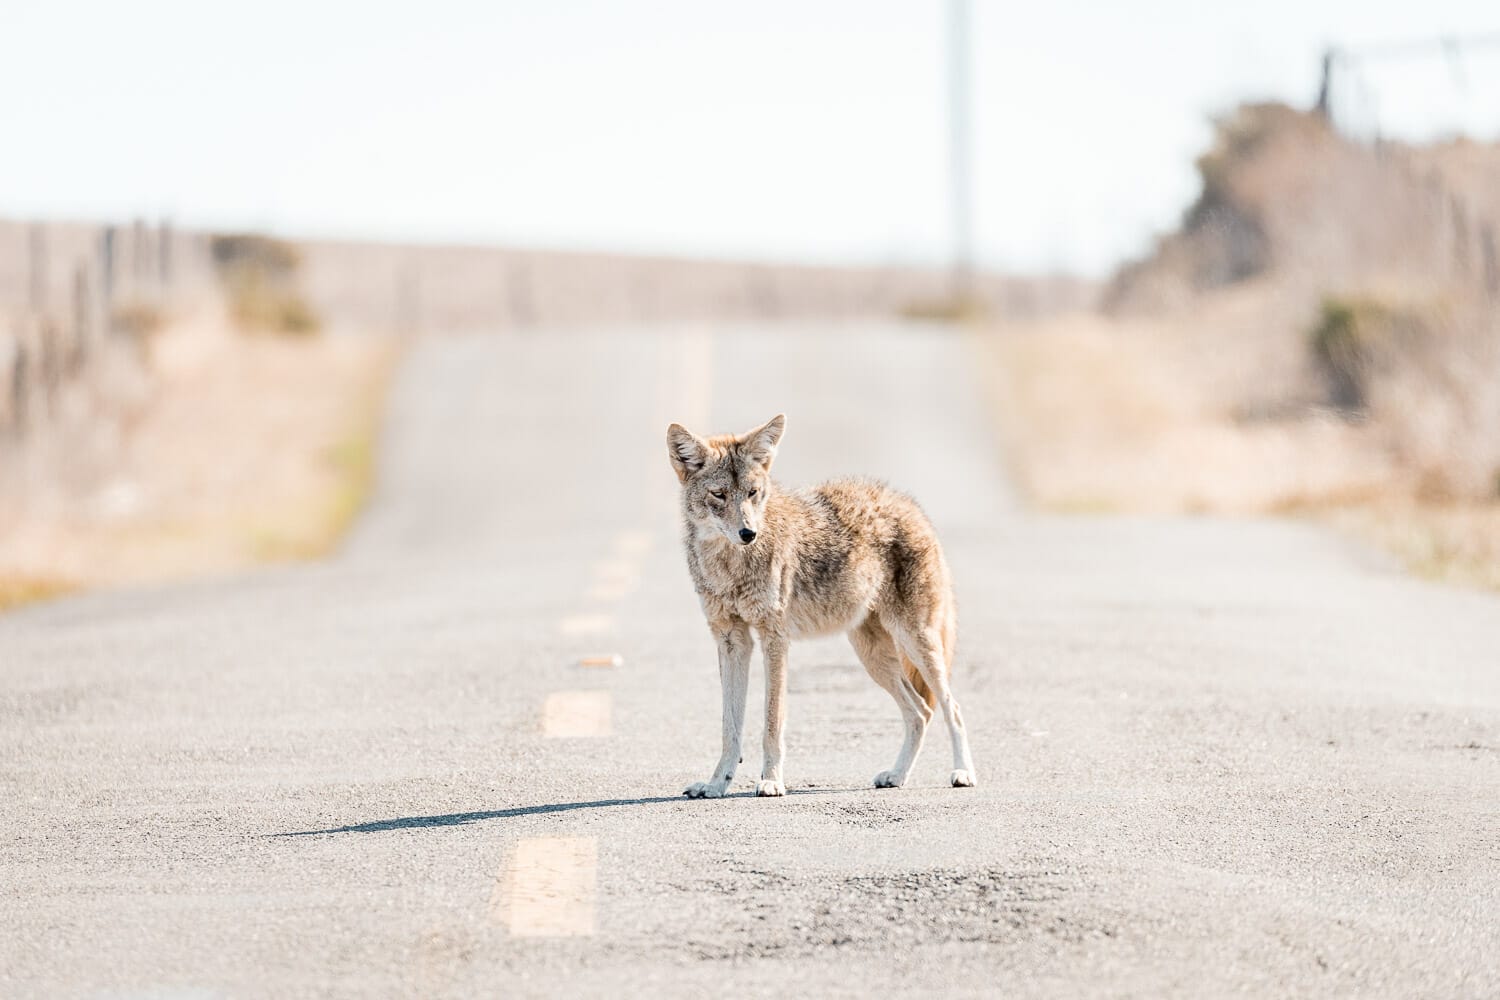 A coyote standing in the middle of a deserted road.